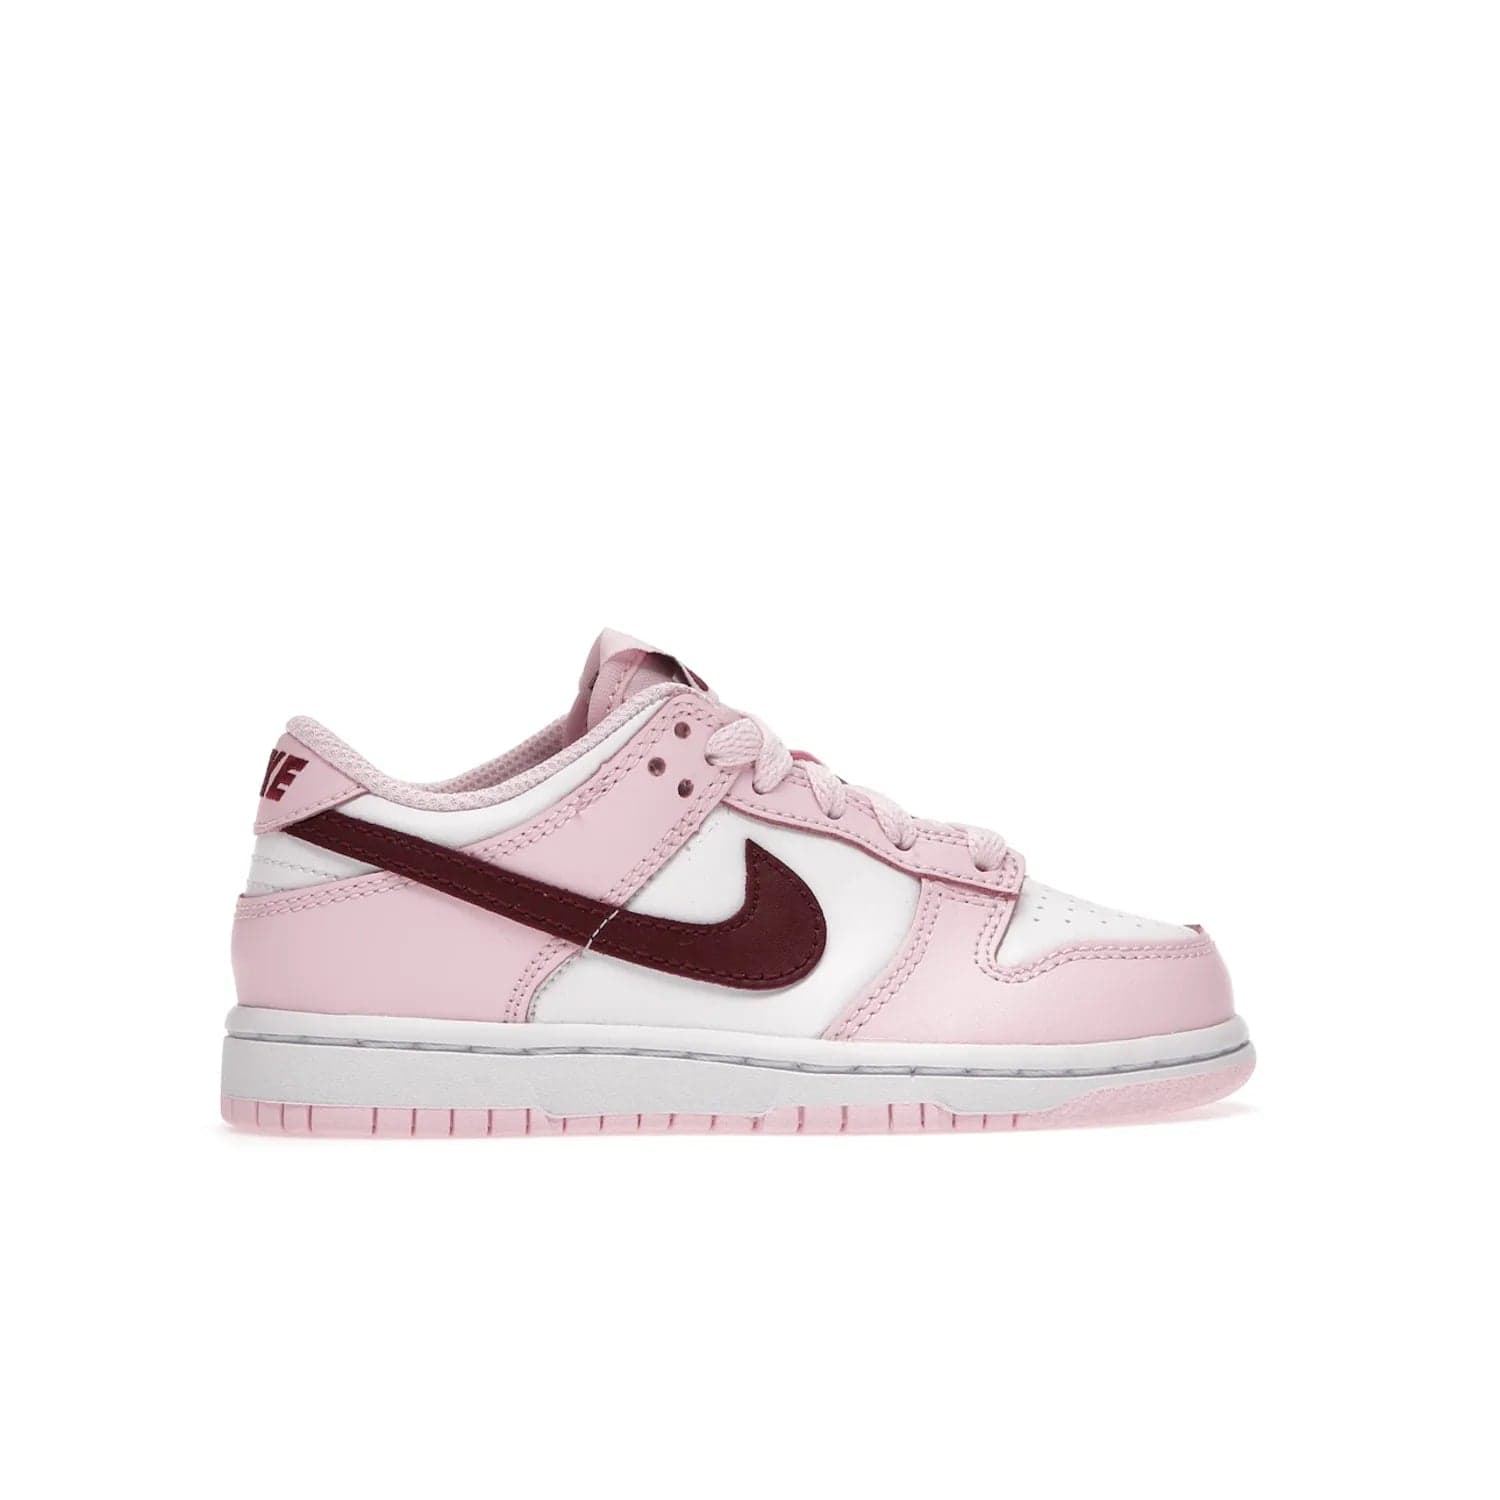 Nike Dunk Low Pink Red White (PS) - Image 36 - Only at www.BallersClubKickz.com - Introducing the Nike Dunk Low Pink Red White (PS), the perfect addition to your sneaker collection. A classic silhouette with modern vibrant colors, including a pink upper with red and white accents and a white midsole. Comfort and durability, perfect for any outfit. Limited edition, available June 22nd.